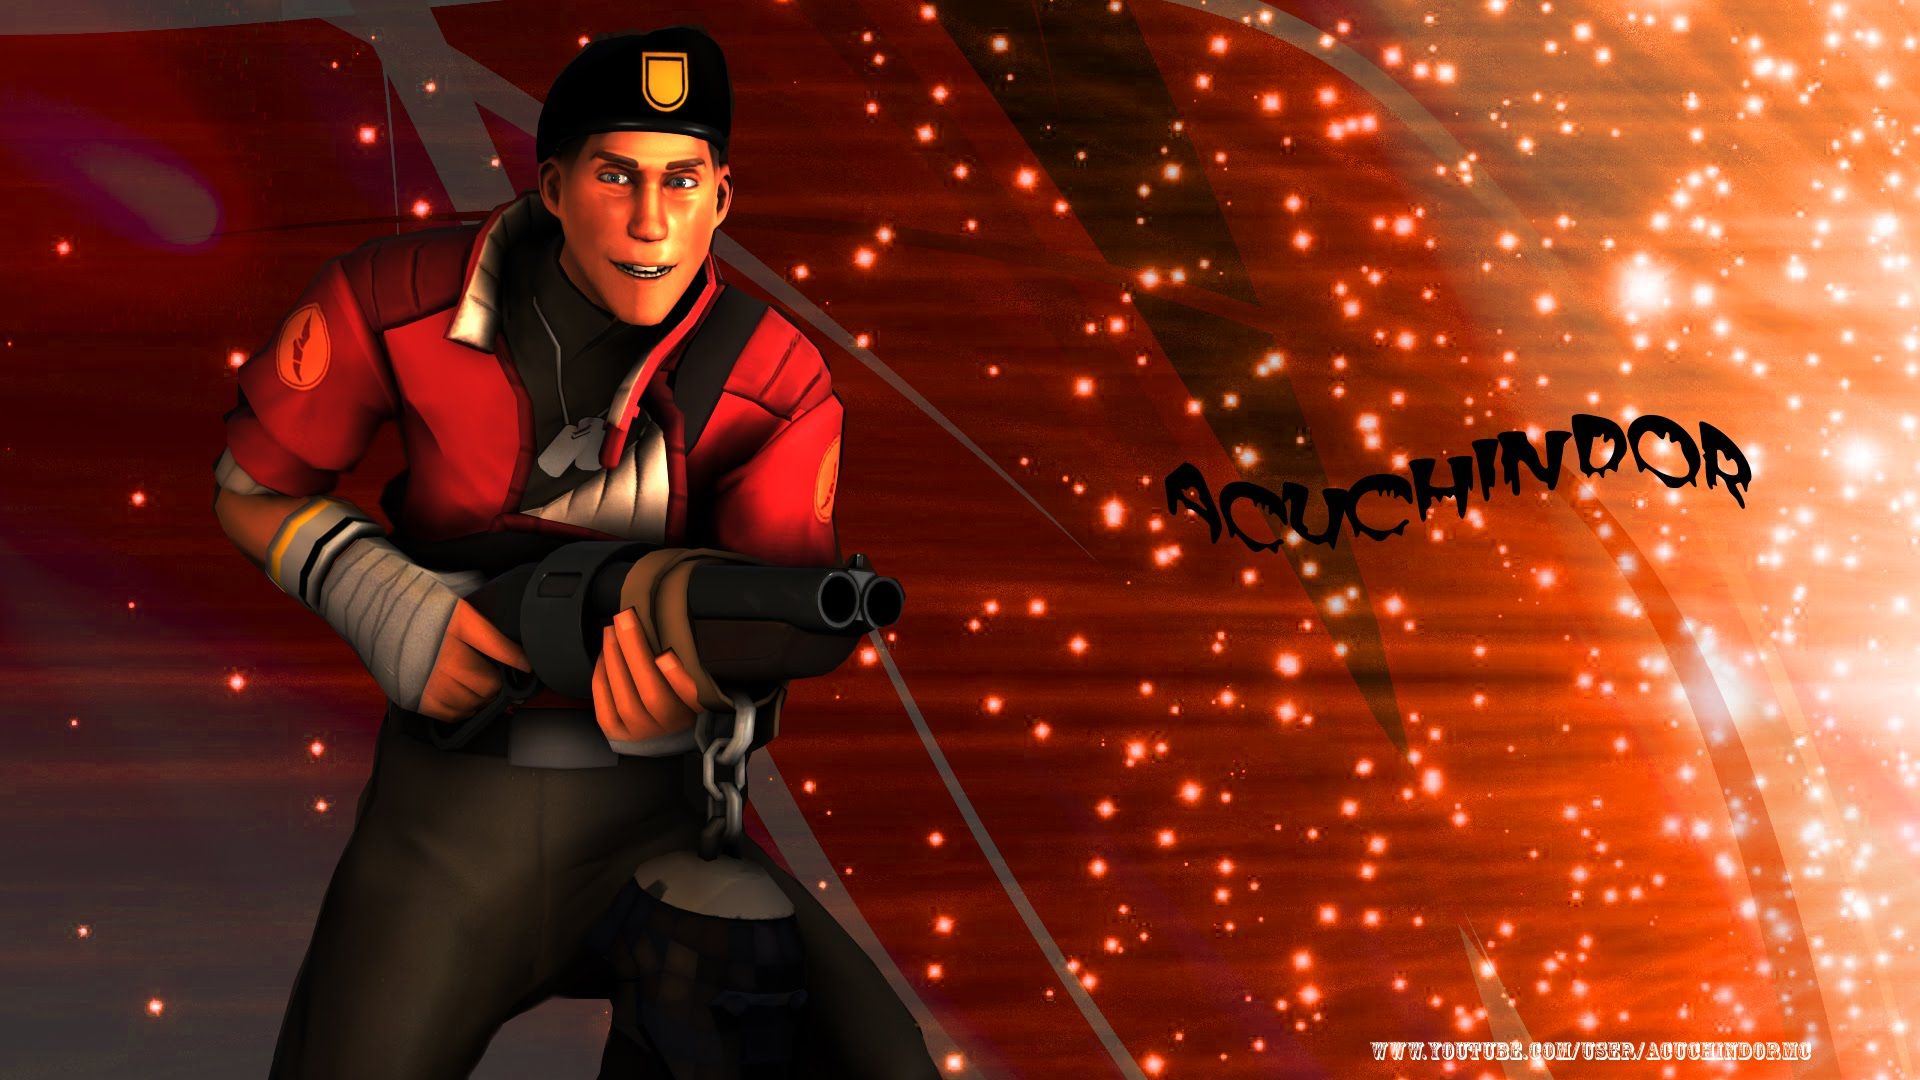 Speed art tf2 scout wallpaper (Parte del especial 50 subs) - YouTube